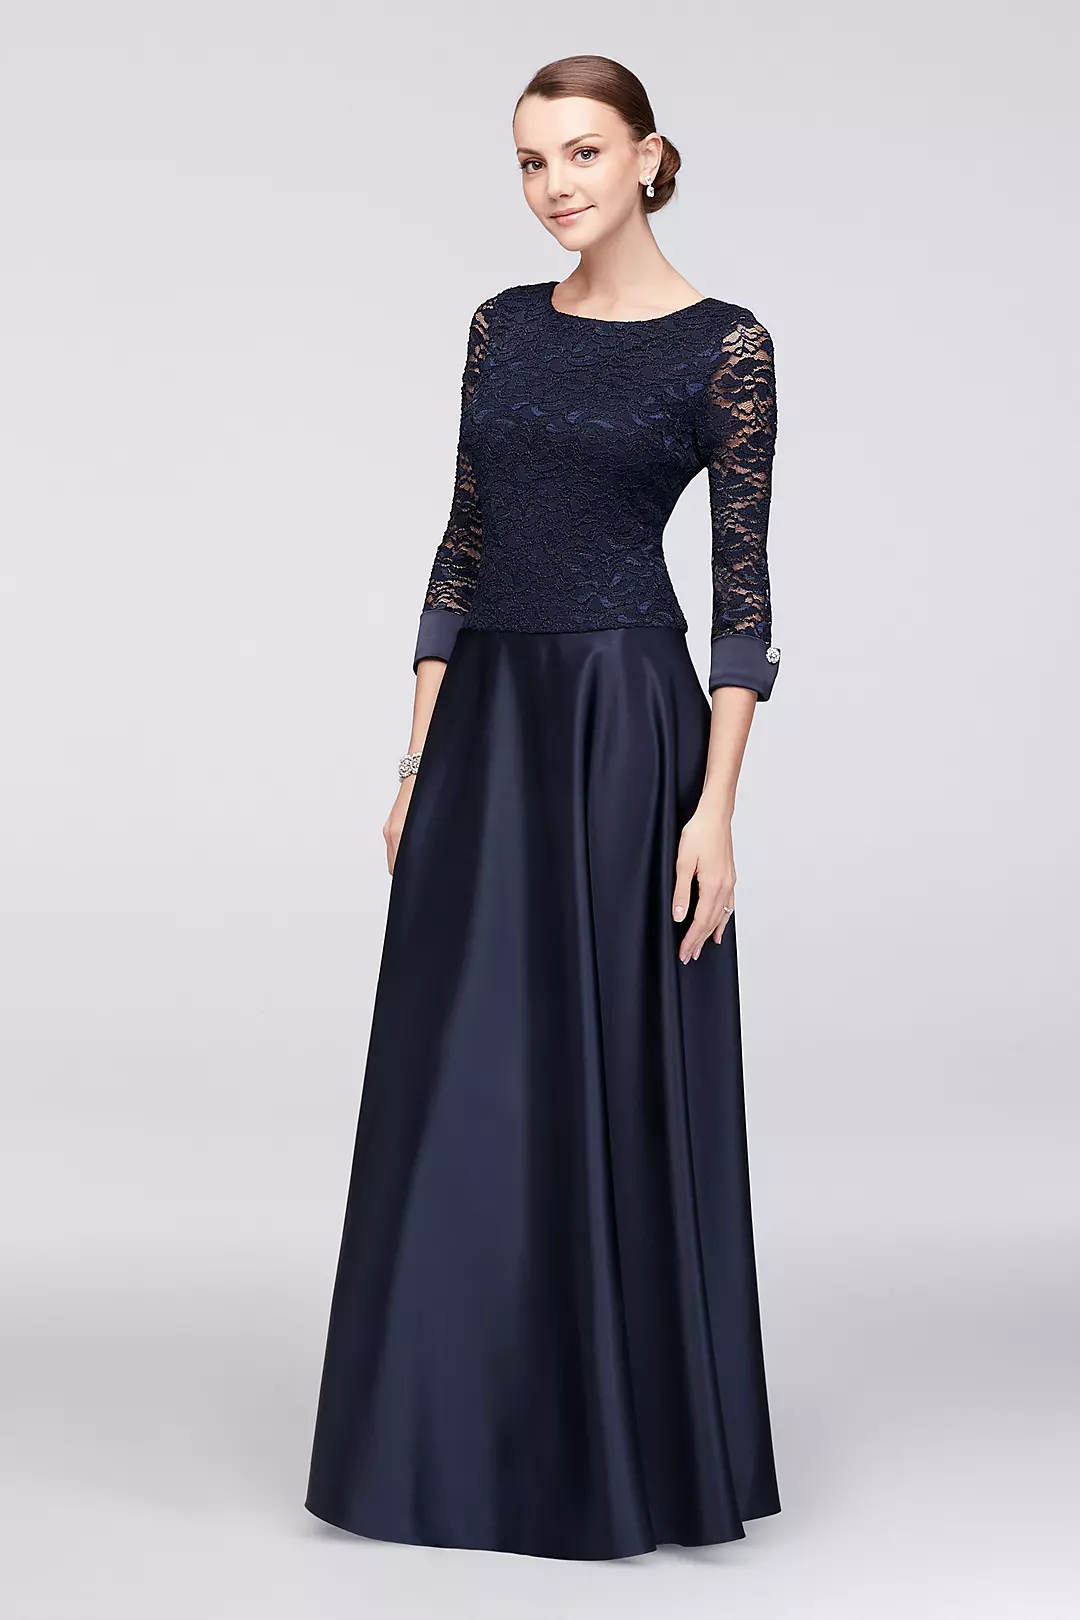 3/4 Sleeve Lace and Satin Dress with Gem Buttons Image